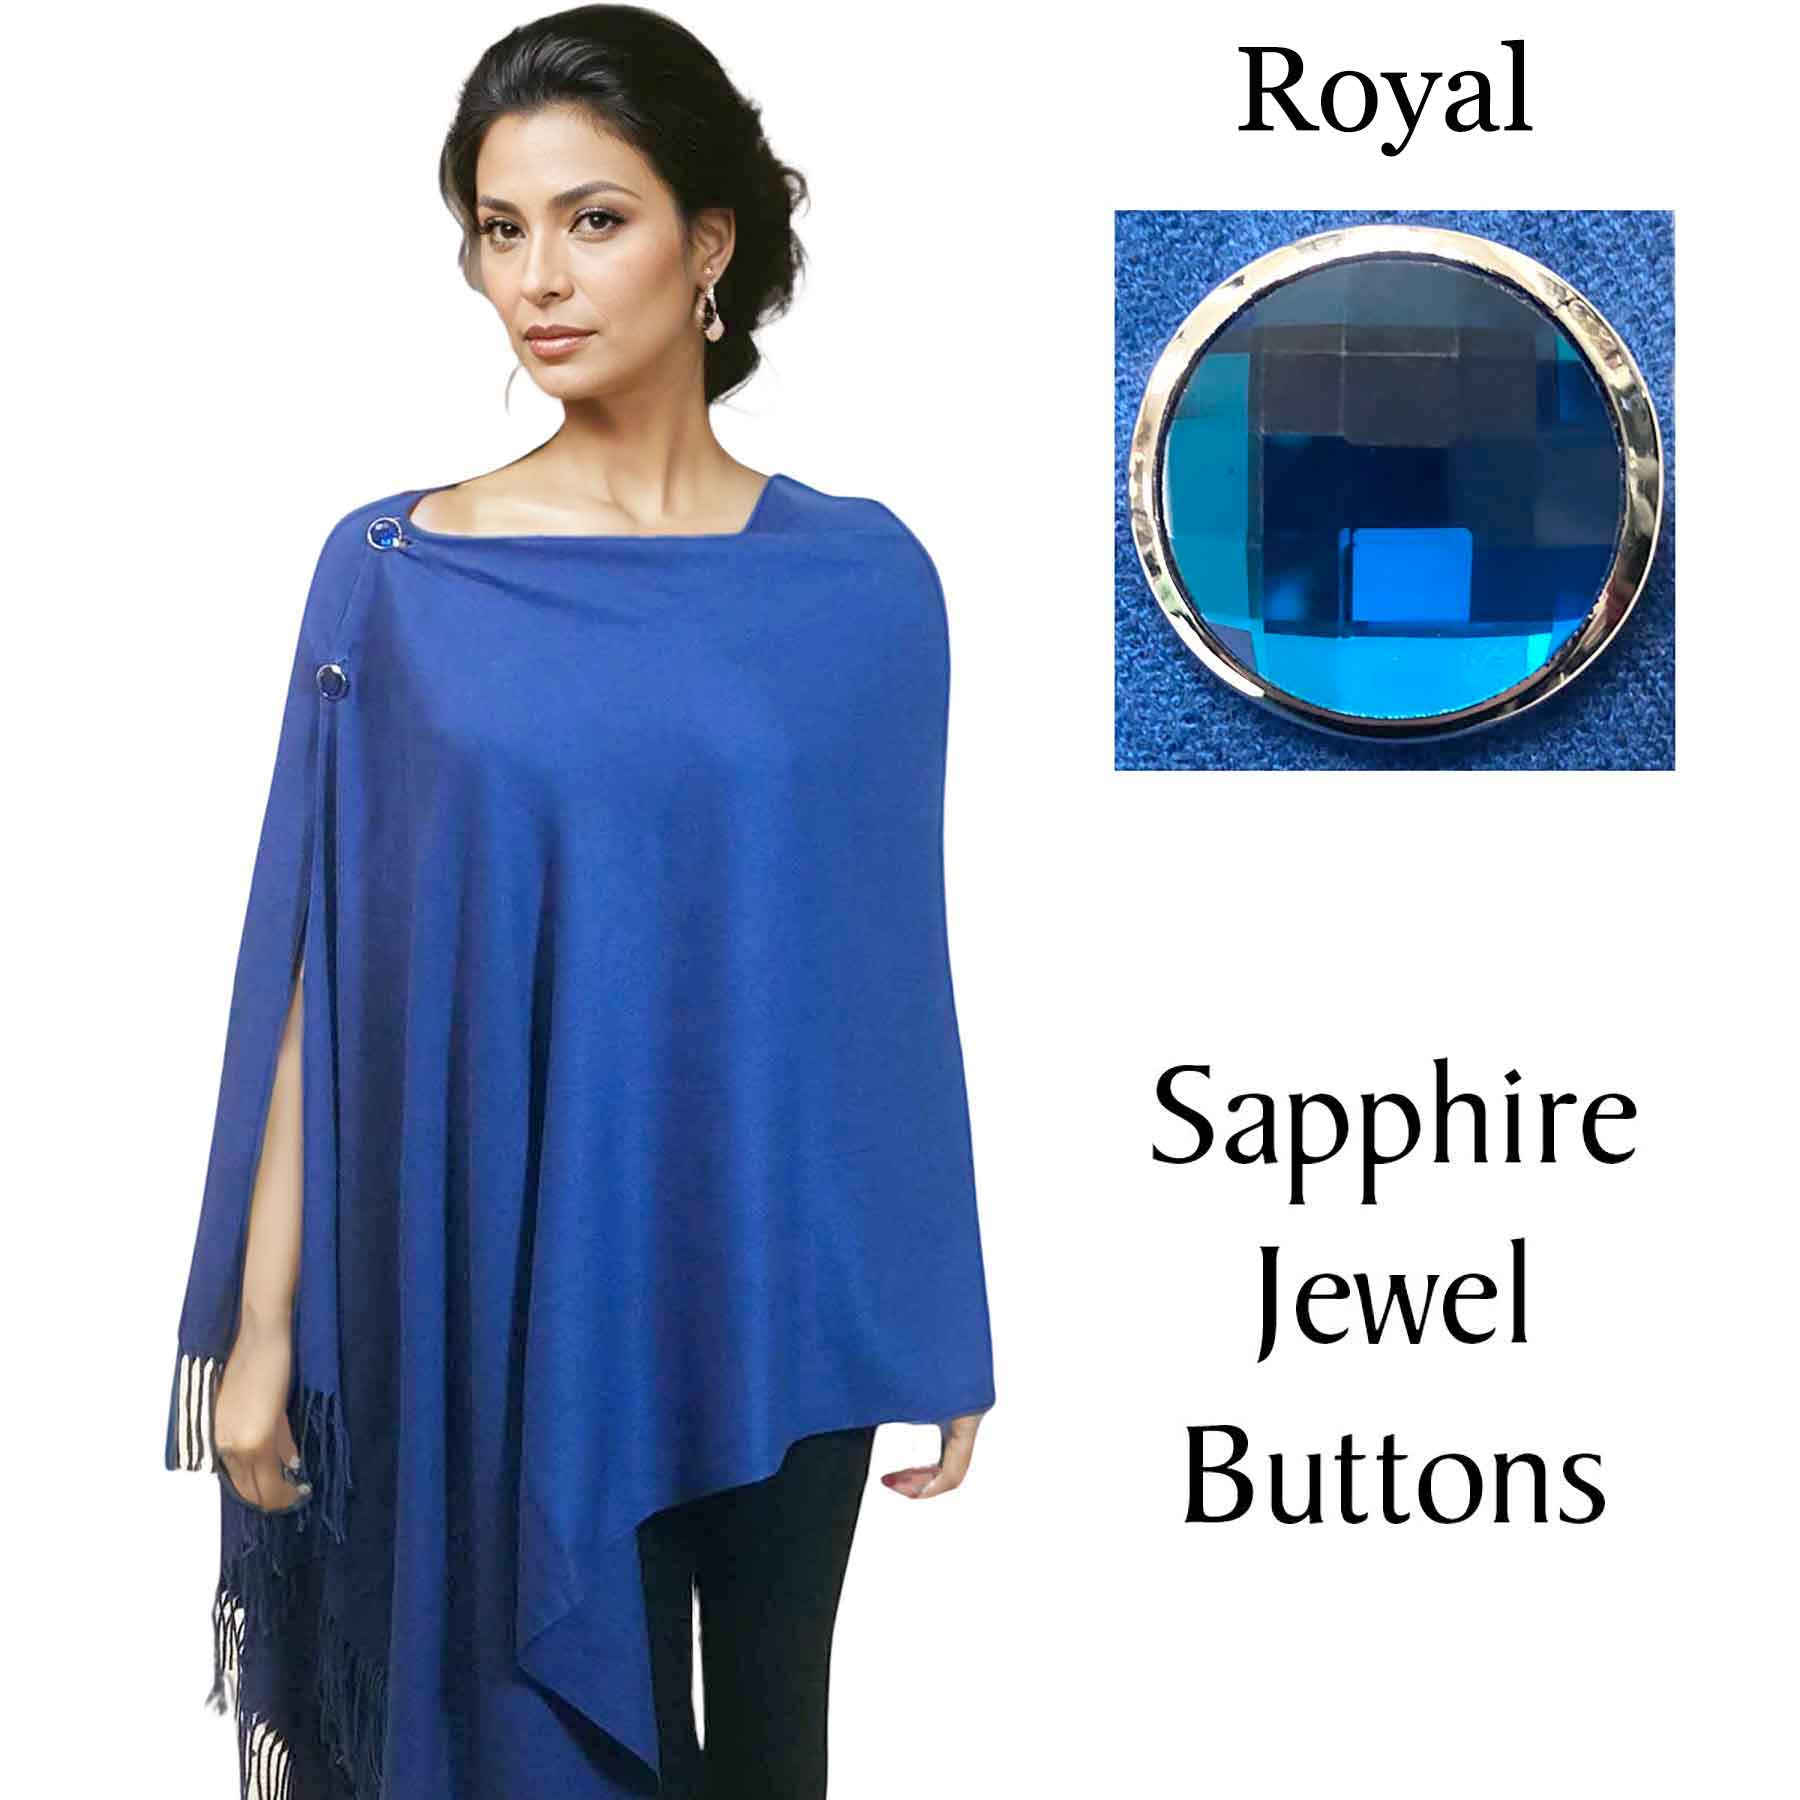 #26 - Royal<br> 
with Sapphire Jewel Buttons